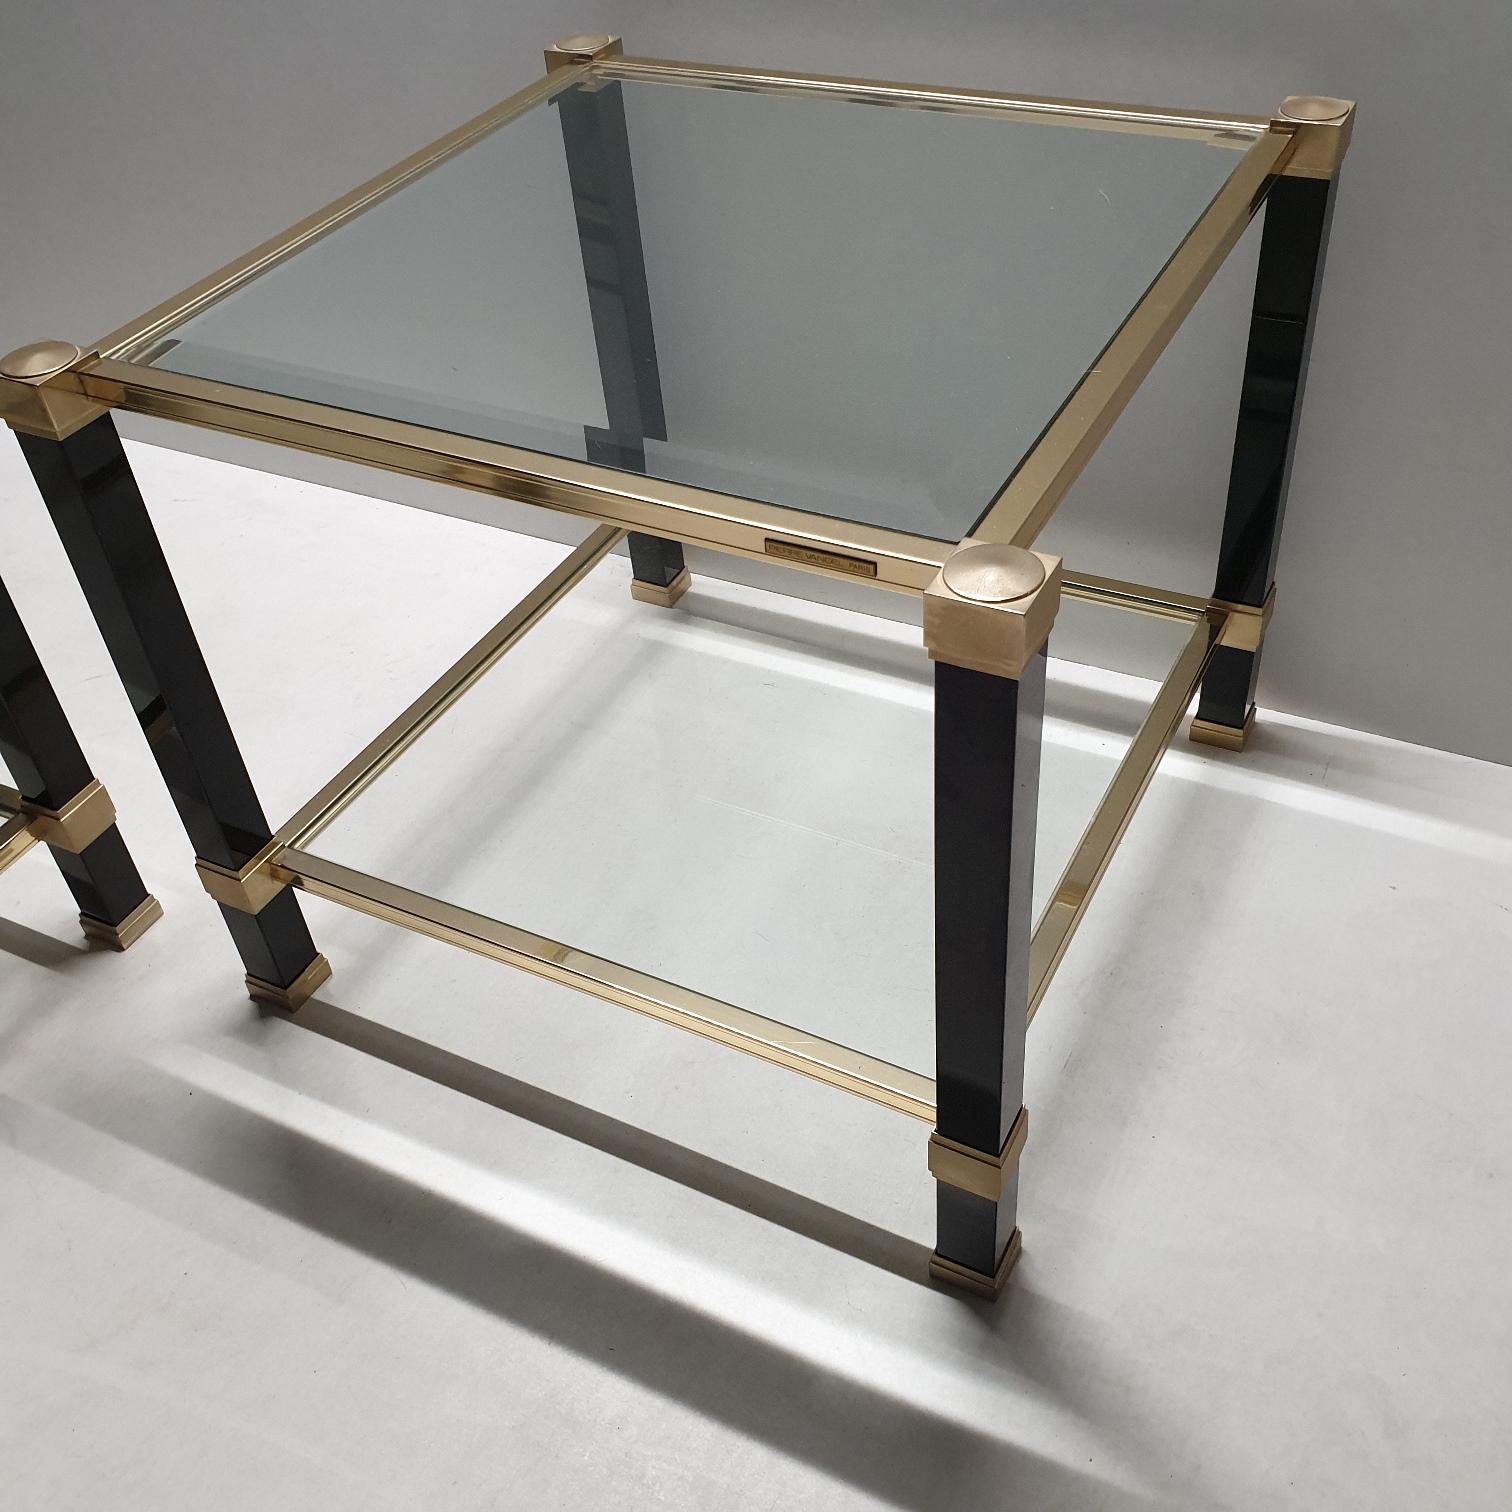 Pair of Brass 2-Tiers Square Site Tables by Pierre Vandel, 1980s, 1 Set of 2 For Sale 4